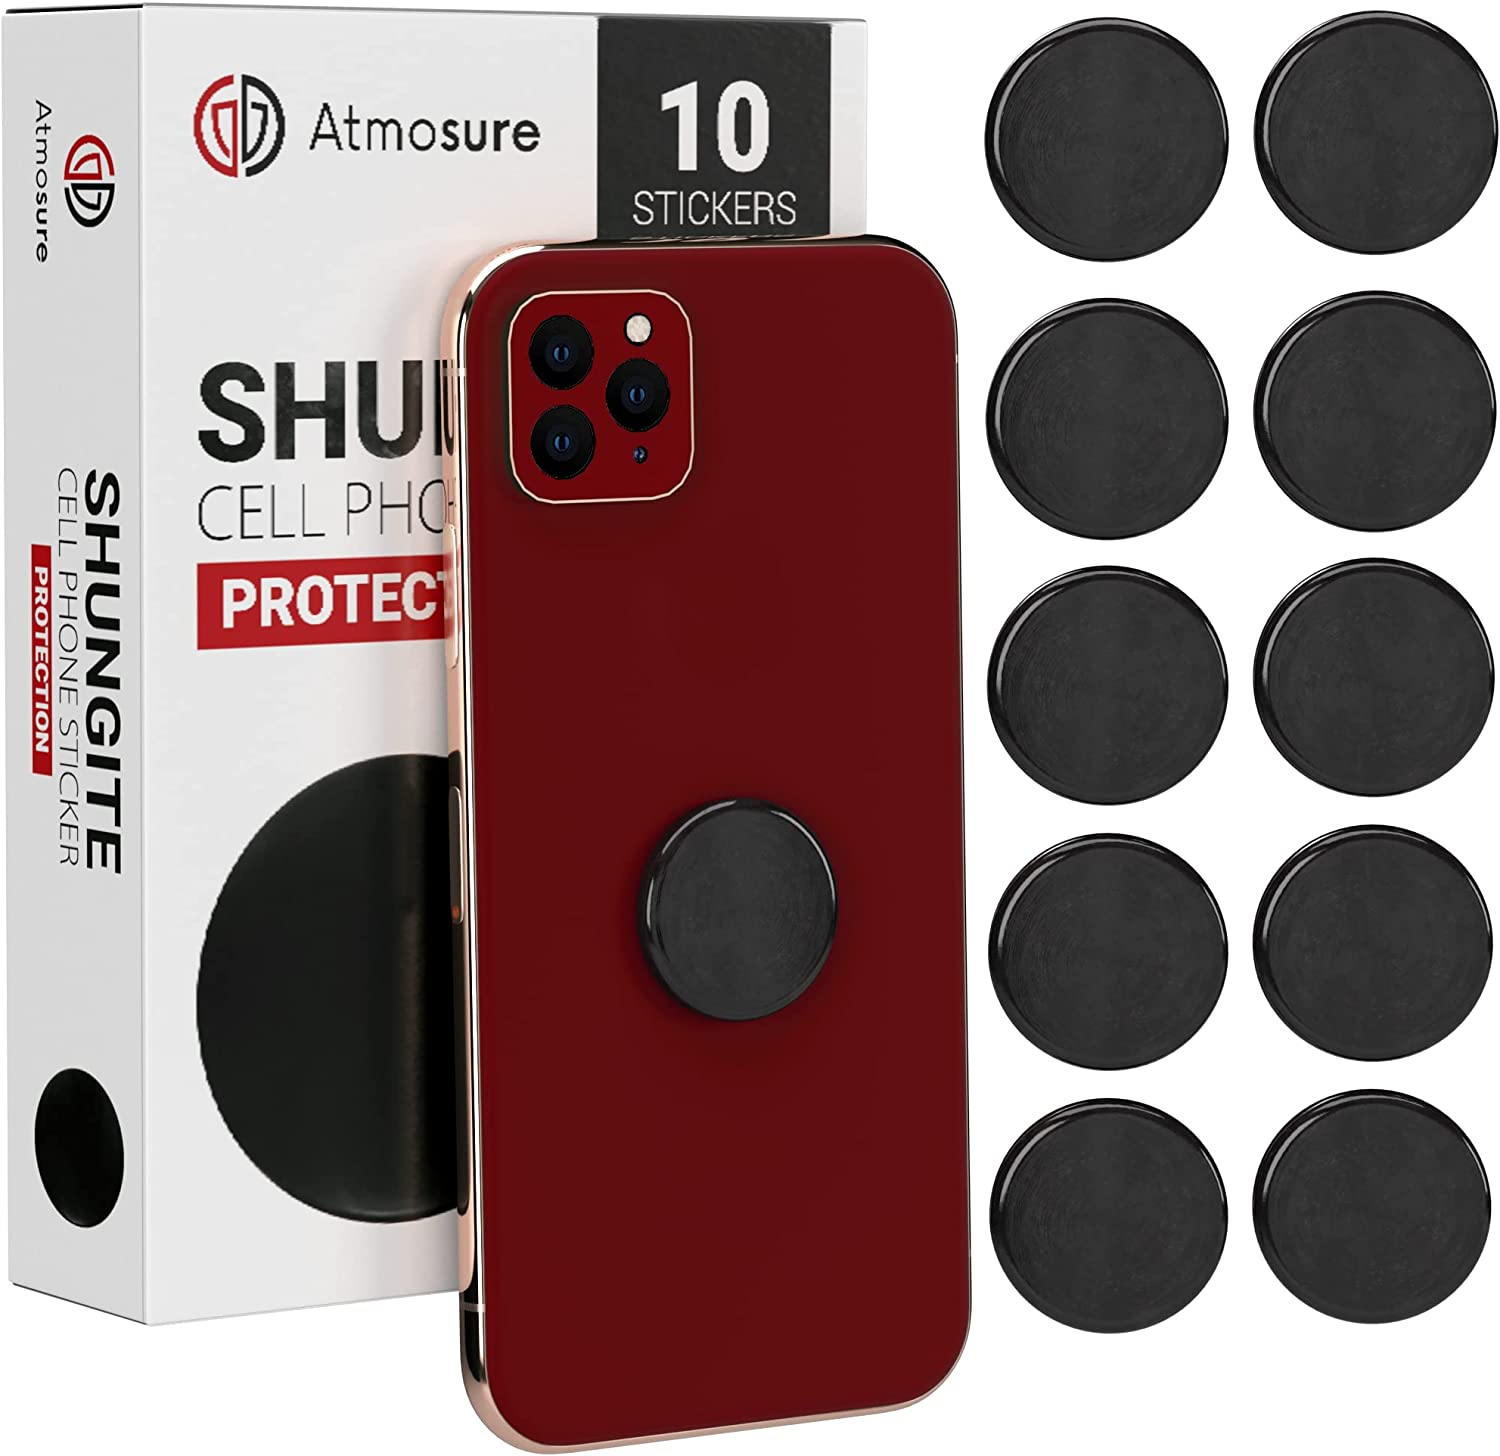 Shungite Cell Phone Stickers For EMF Protection (10-Pack)